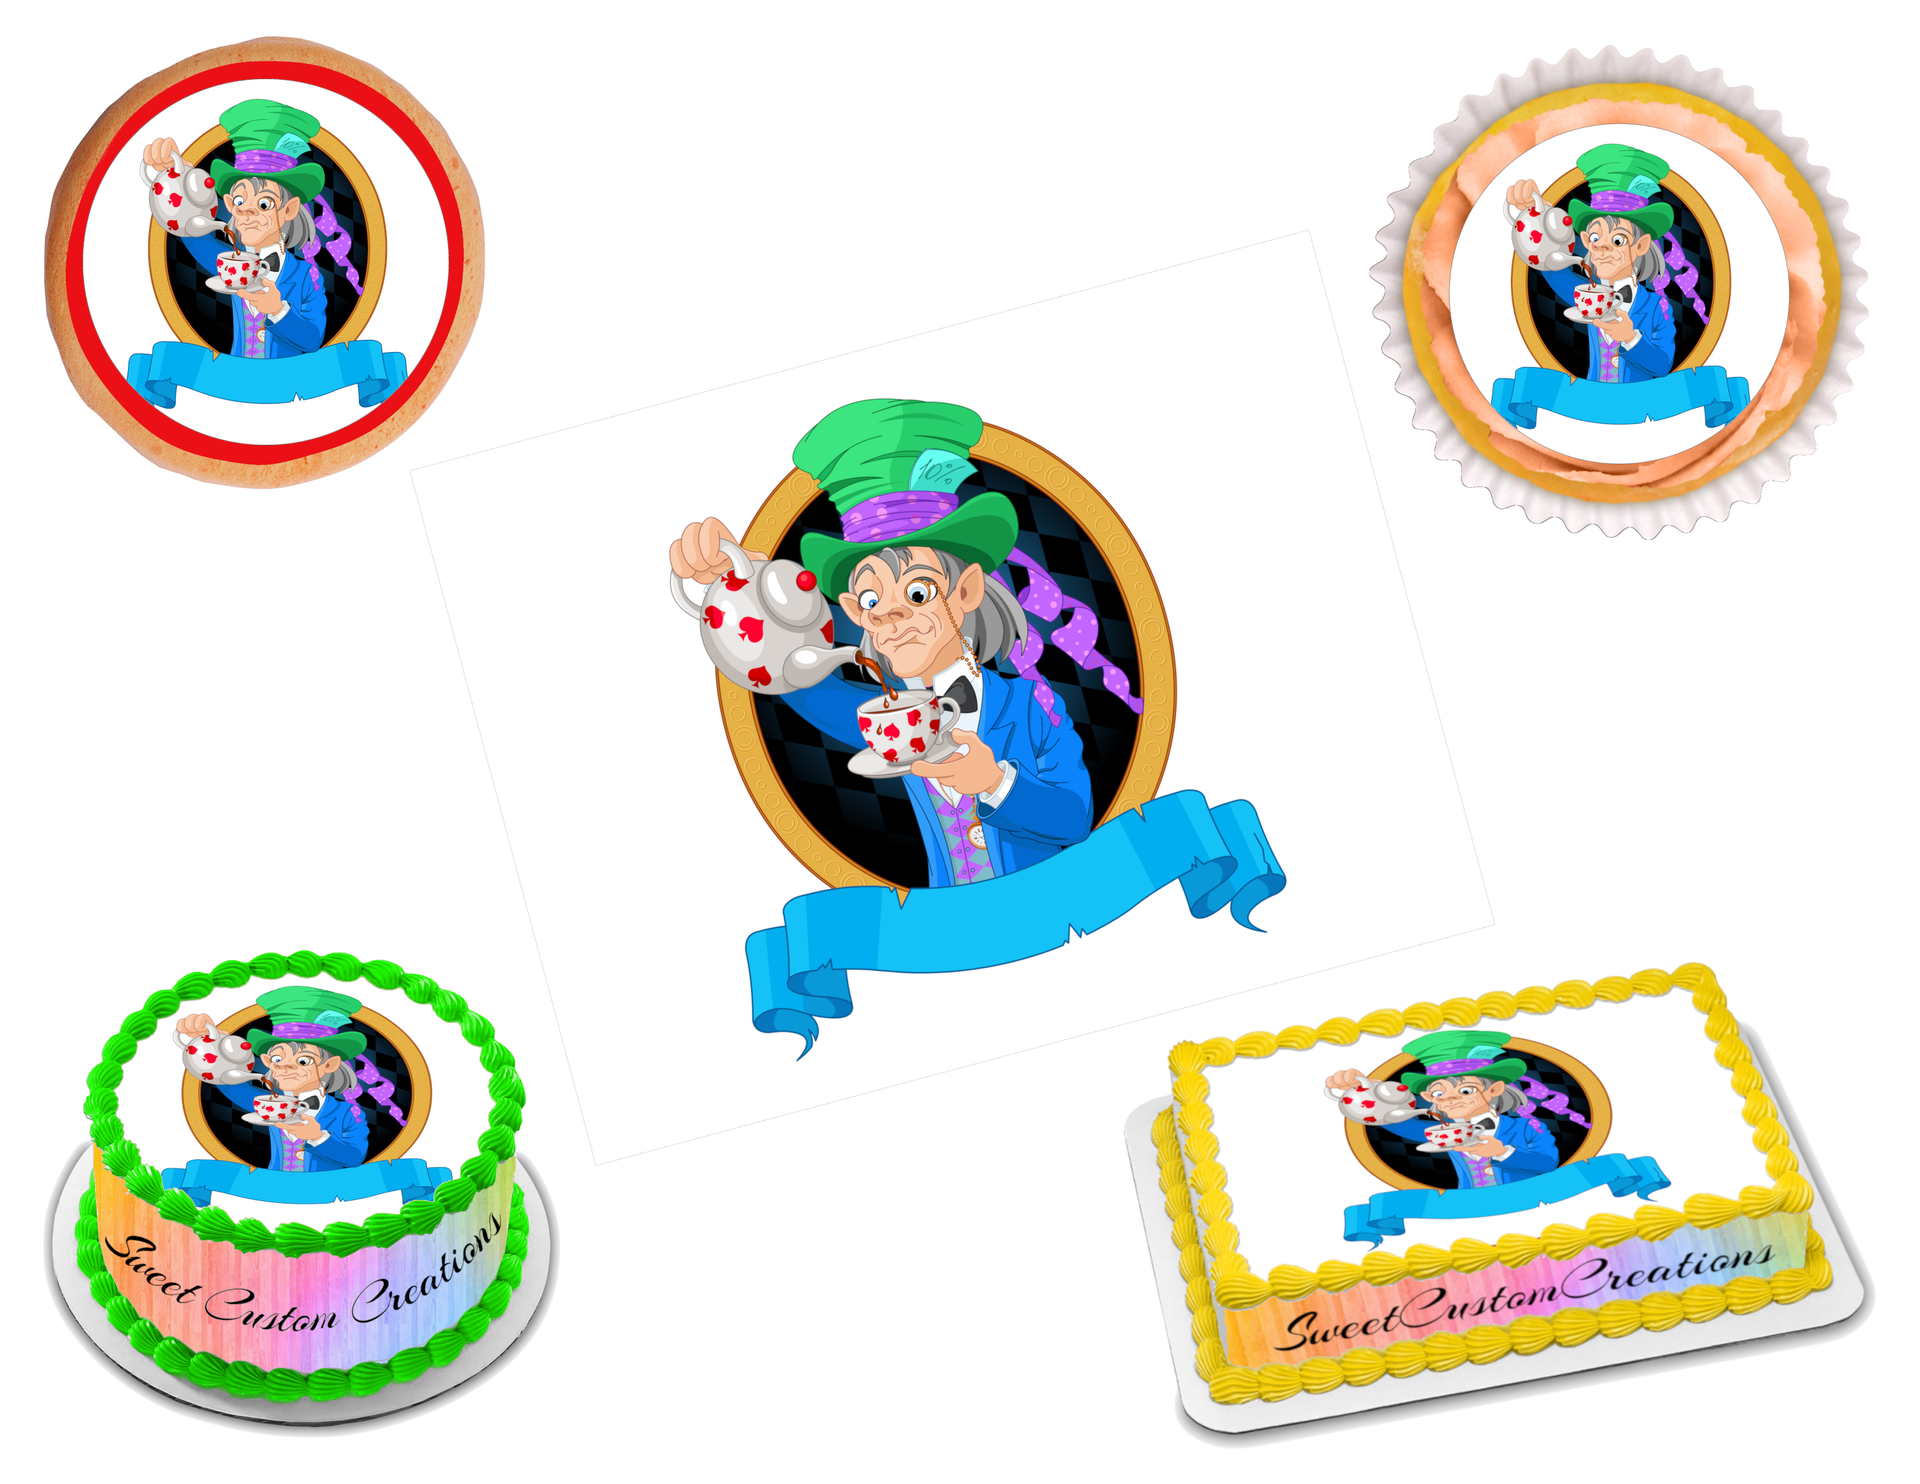 Mad hatter edible image frosting sheet sizes â sweet custom creations